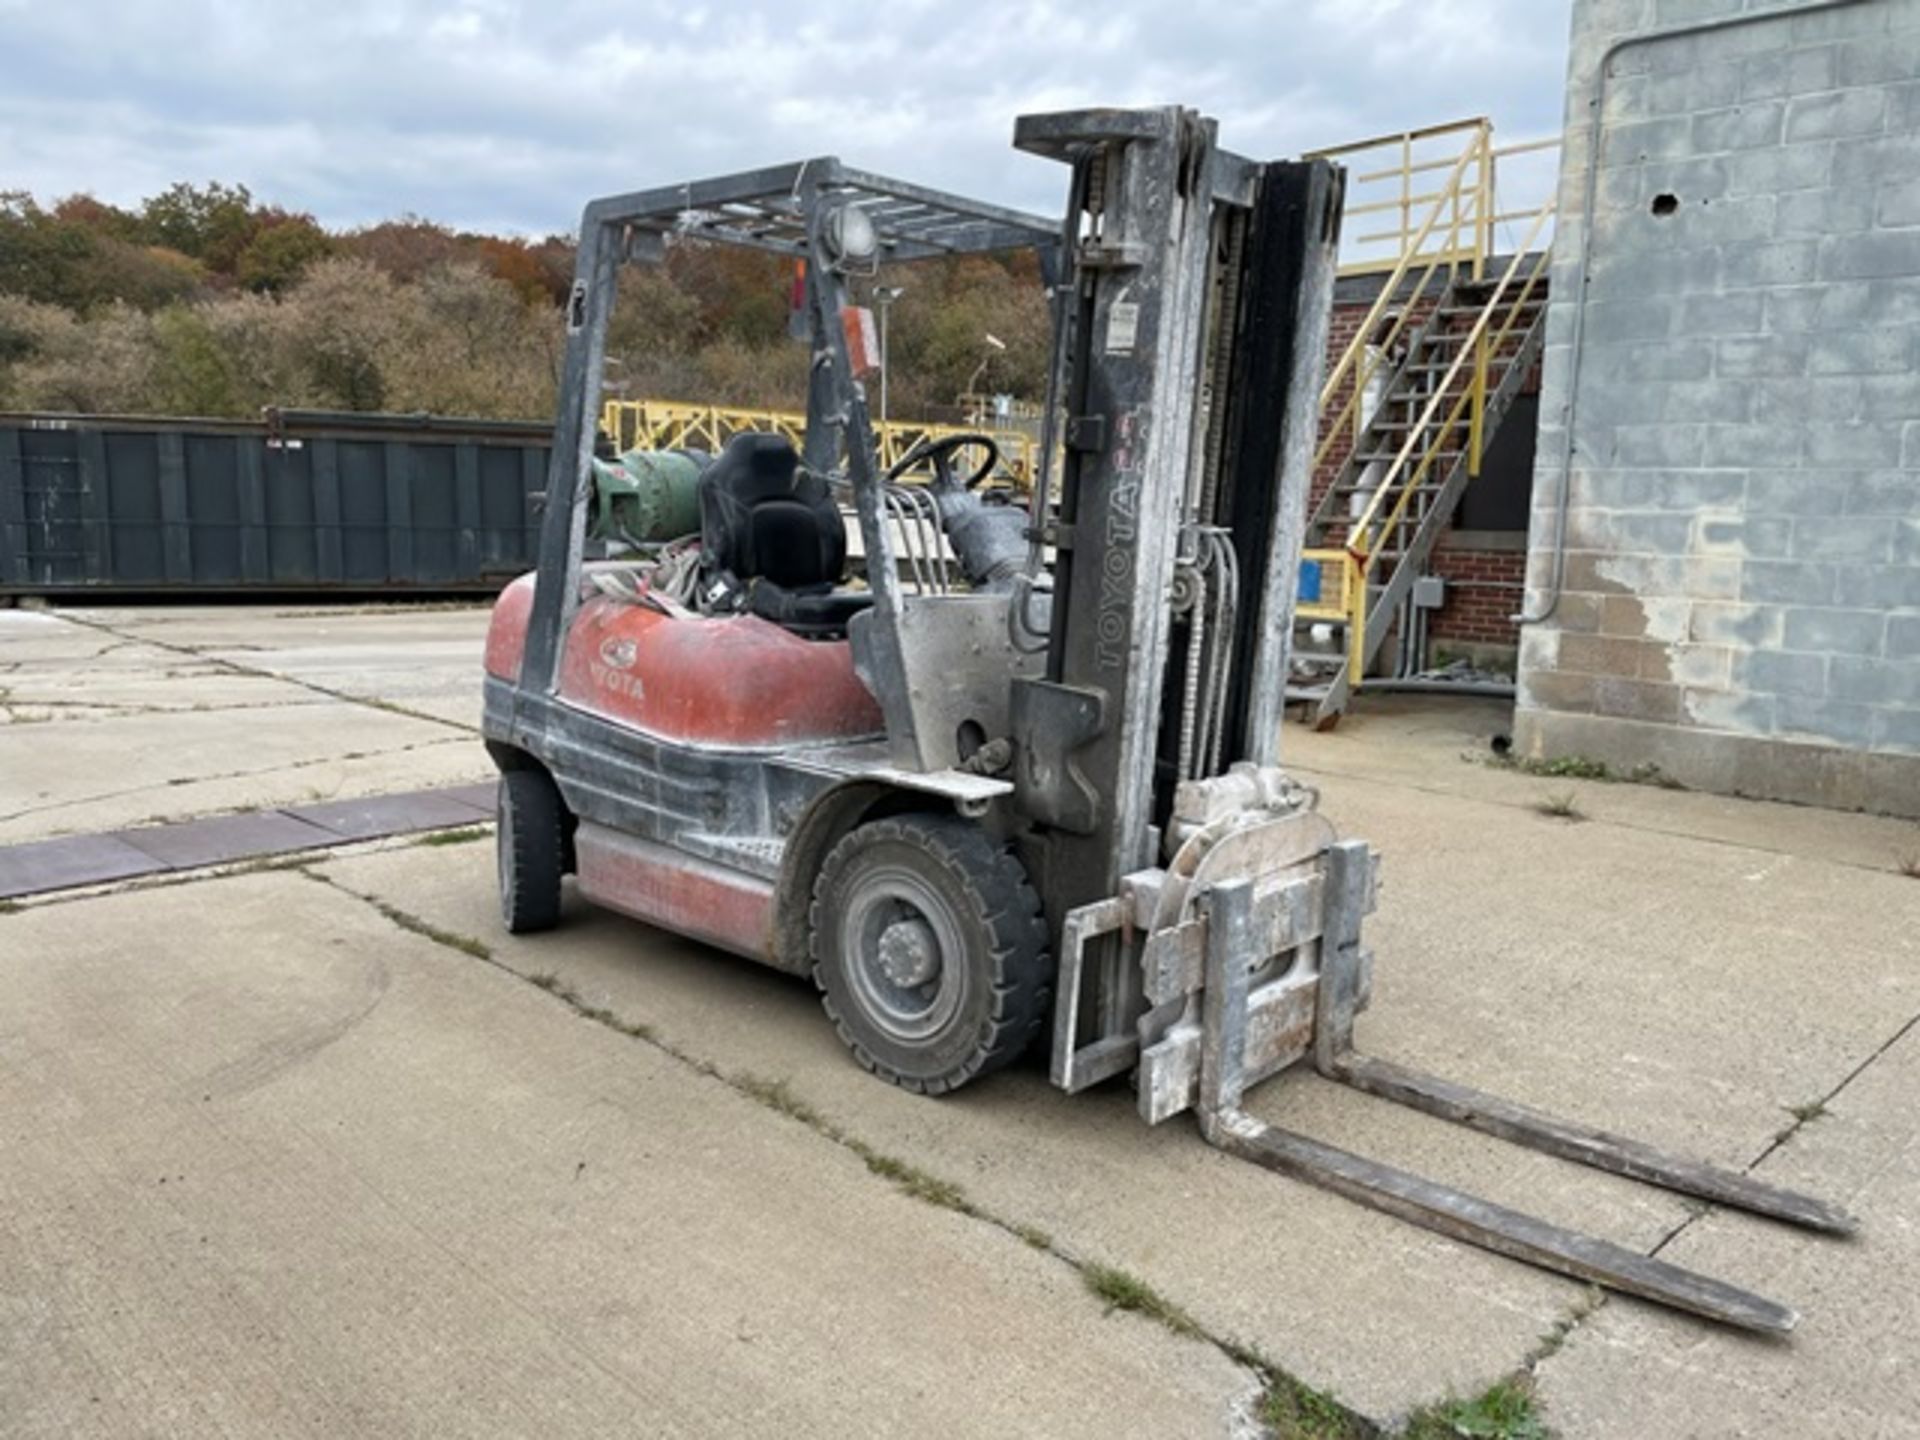 Toyota Model #42 6FGU25 Fork Lift, Propane, For Attachment, ROPS - Image 3 of 4